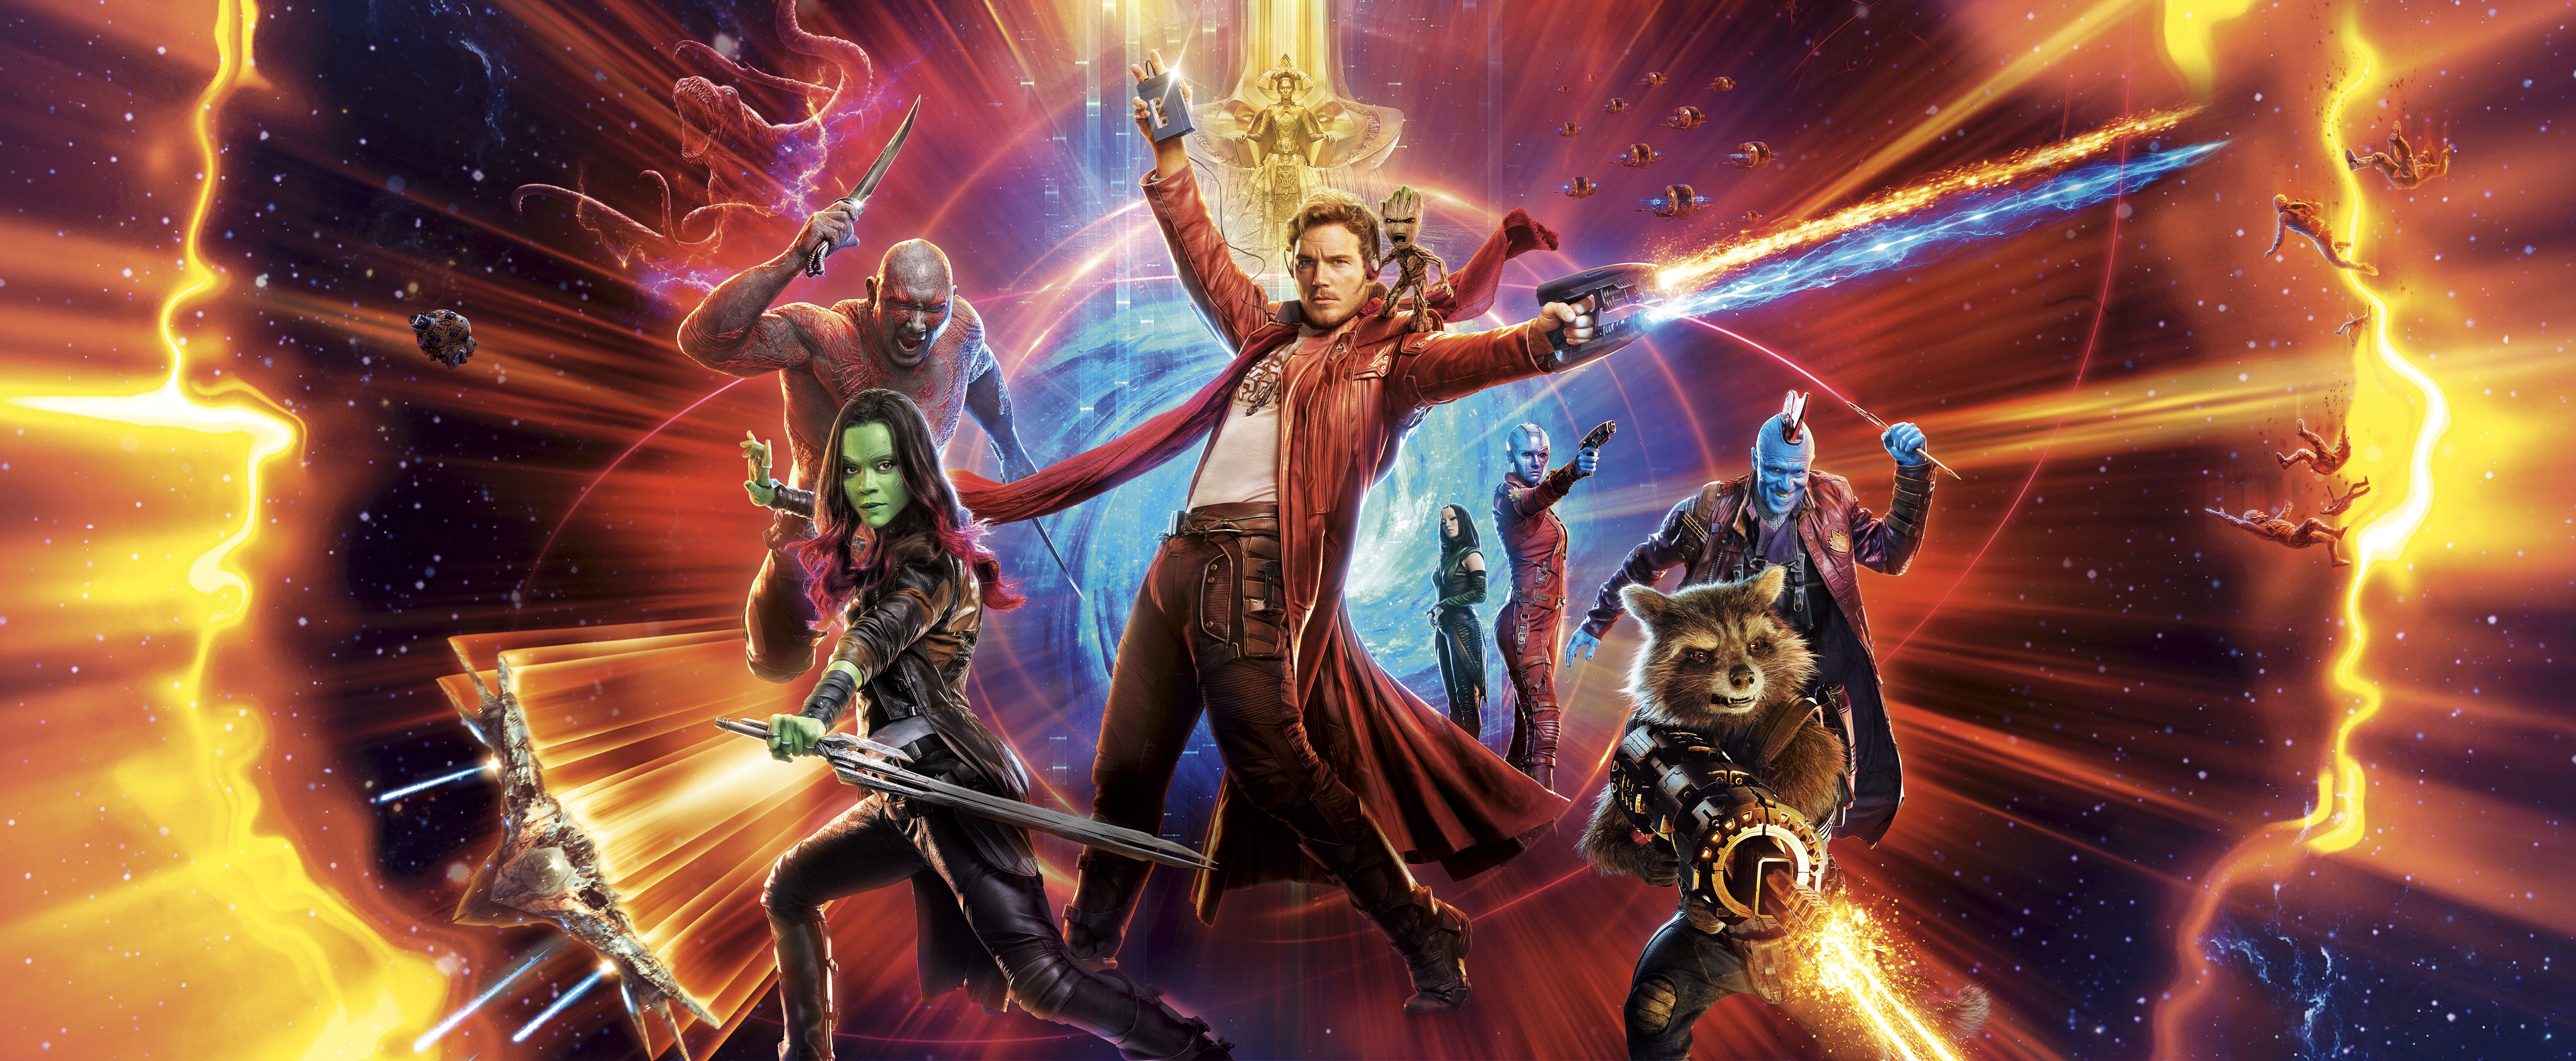 Guardians of the Galaxy Vol. 2 HD Wallpaper and Background